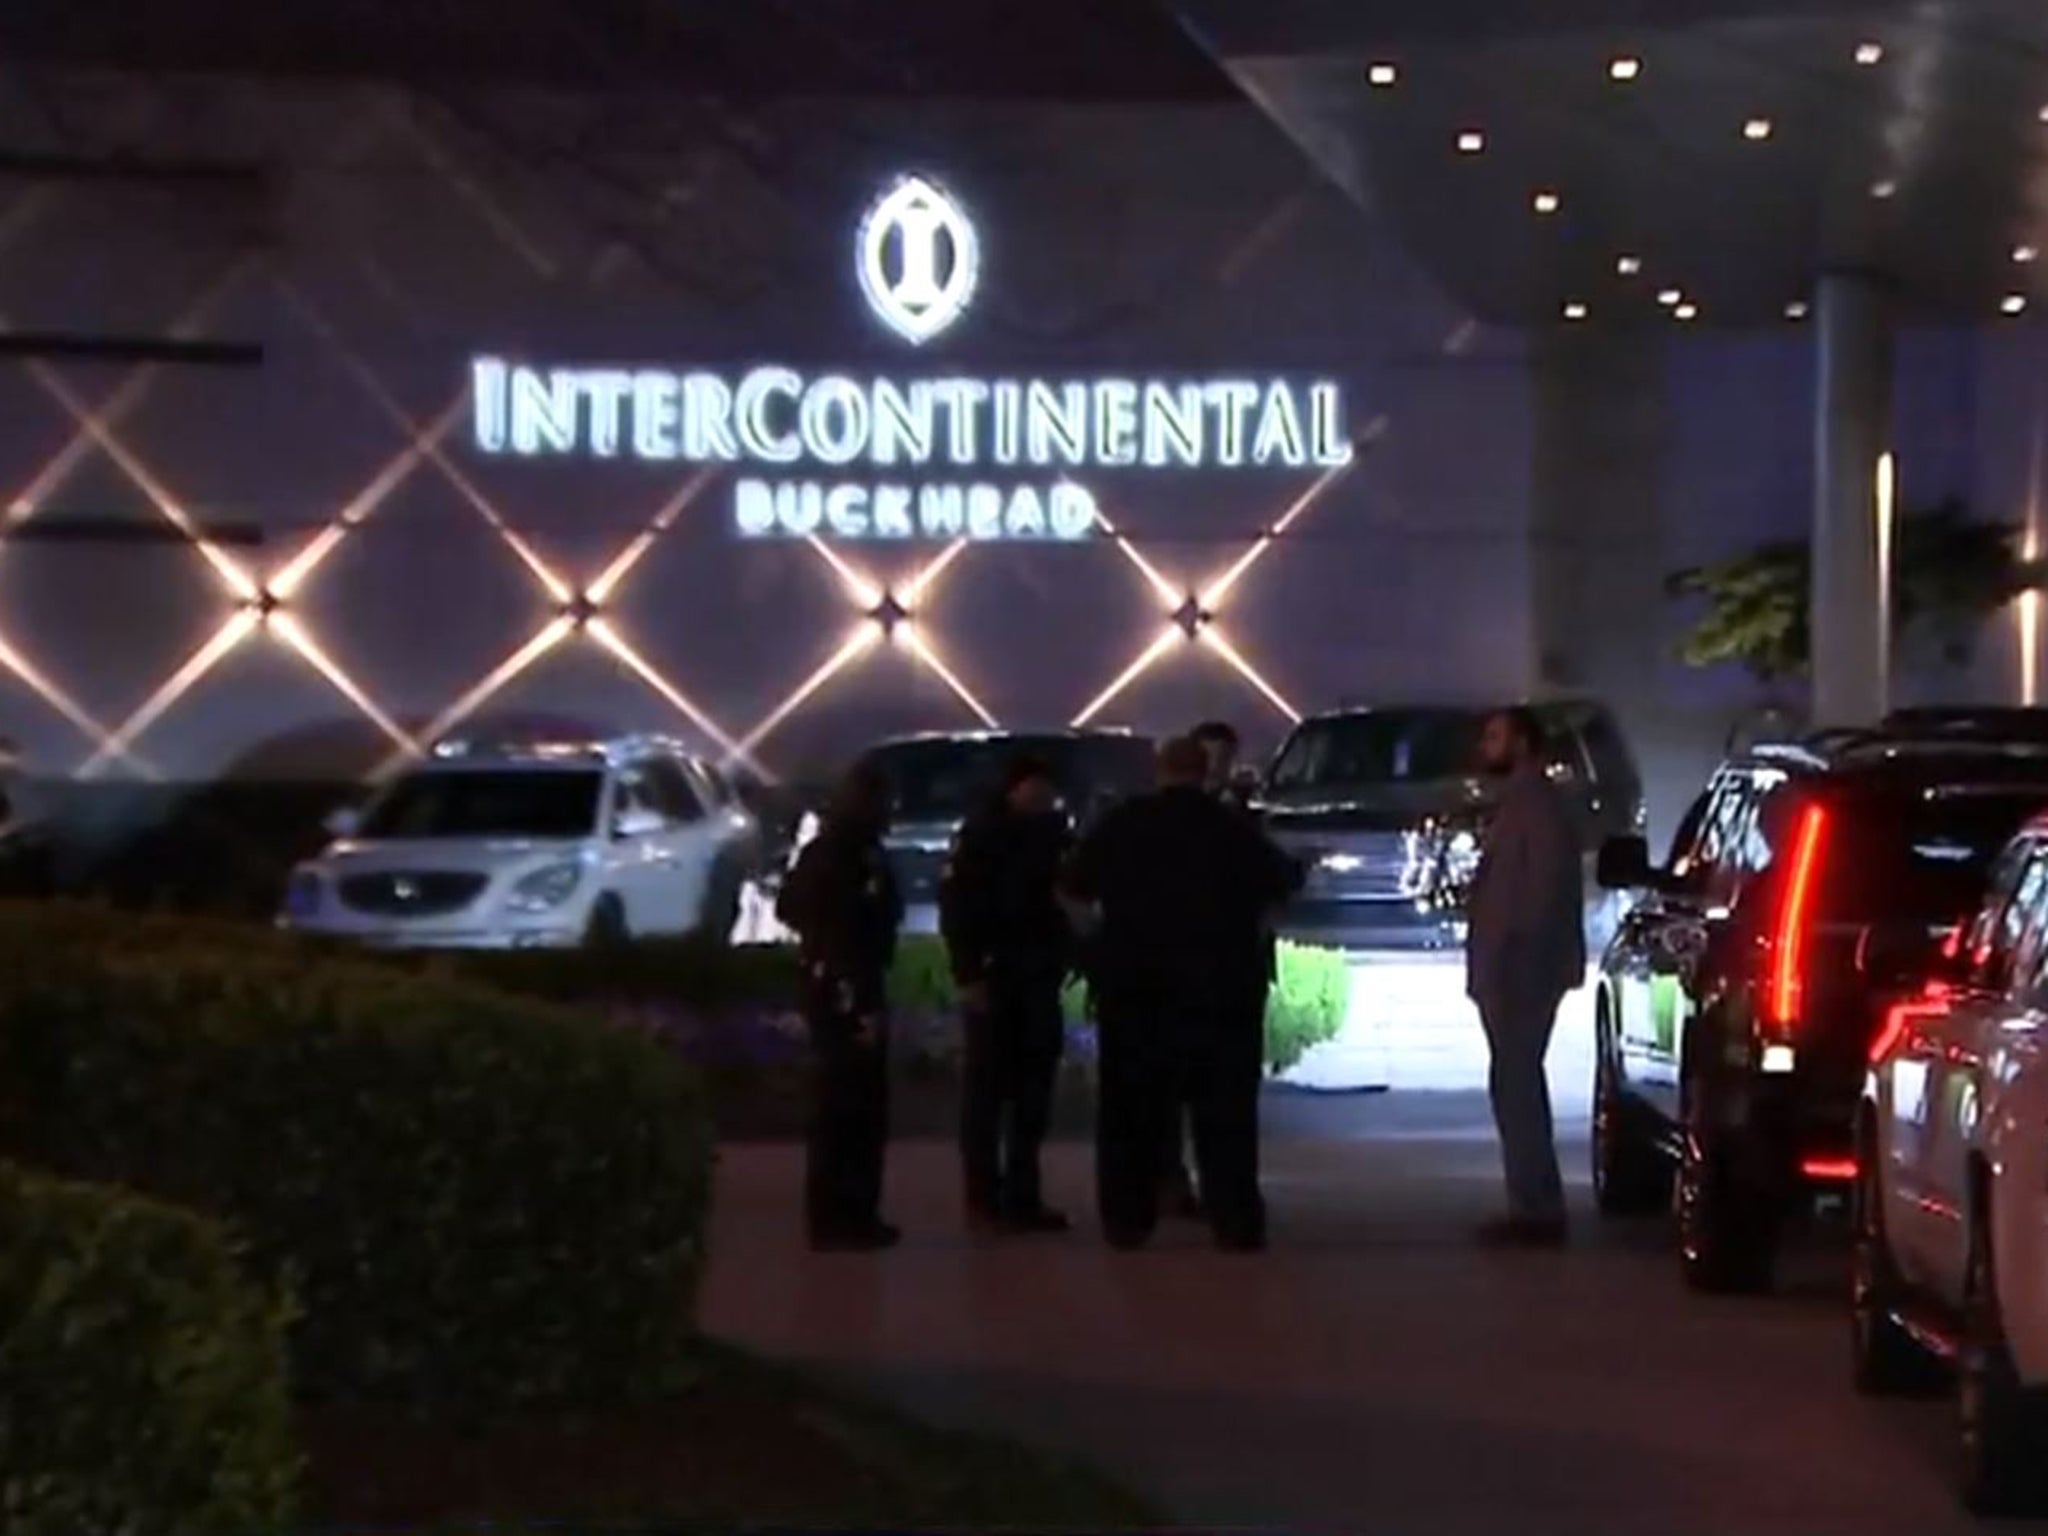 The shooting occurred outside the InterContinental Hotel in Buckhead, Atlanta